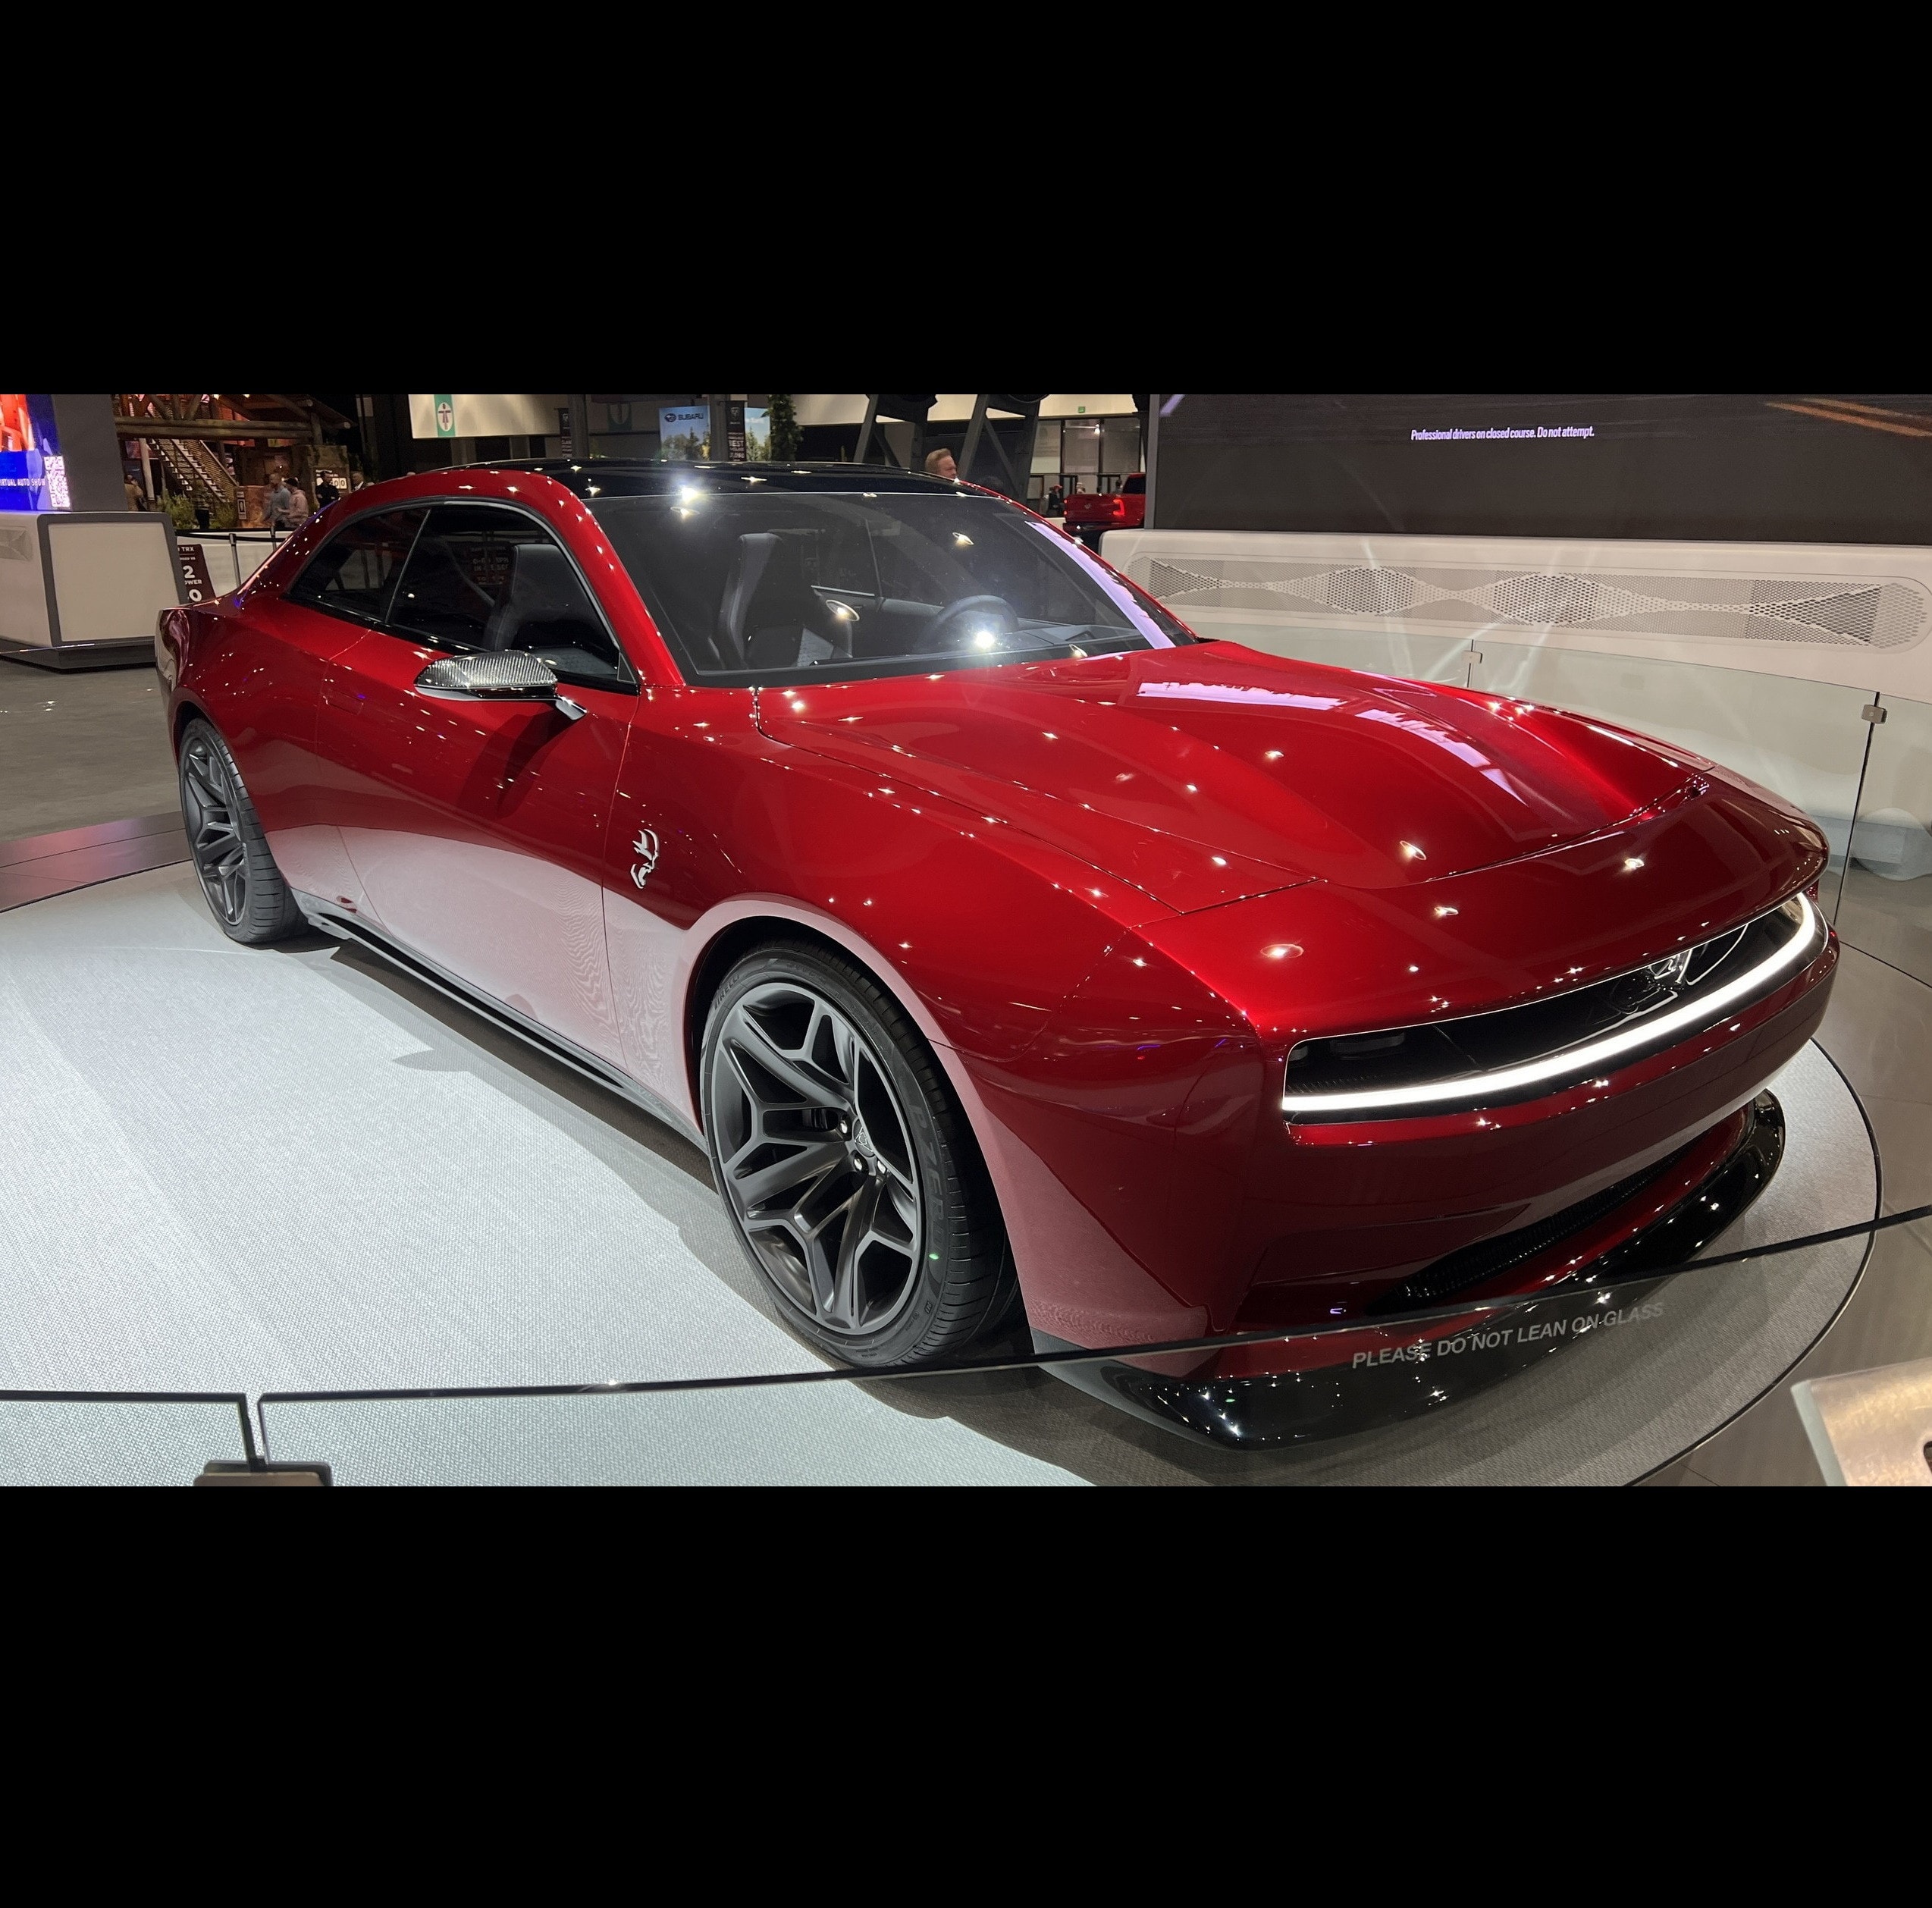 Dodge Charger Daytona Srt Concept Plugs Into The Heart Of The Future At